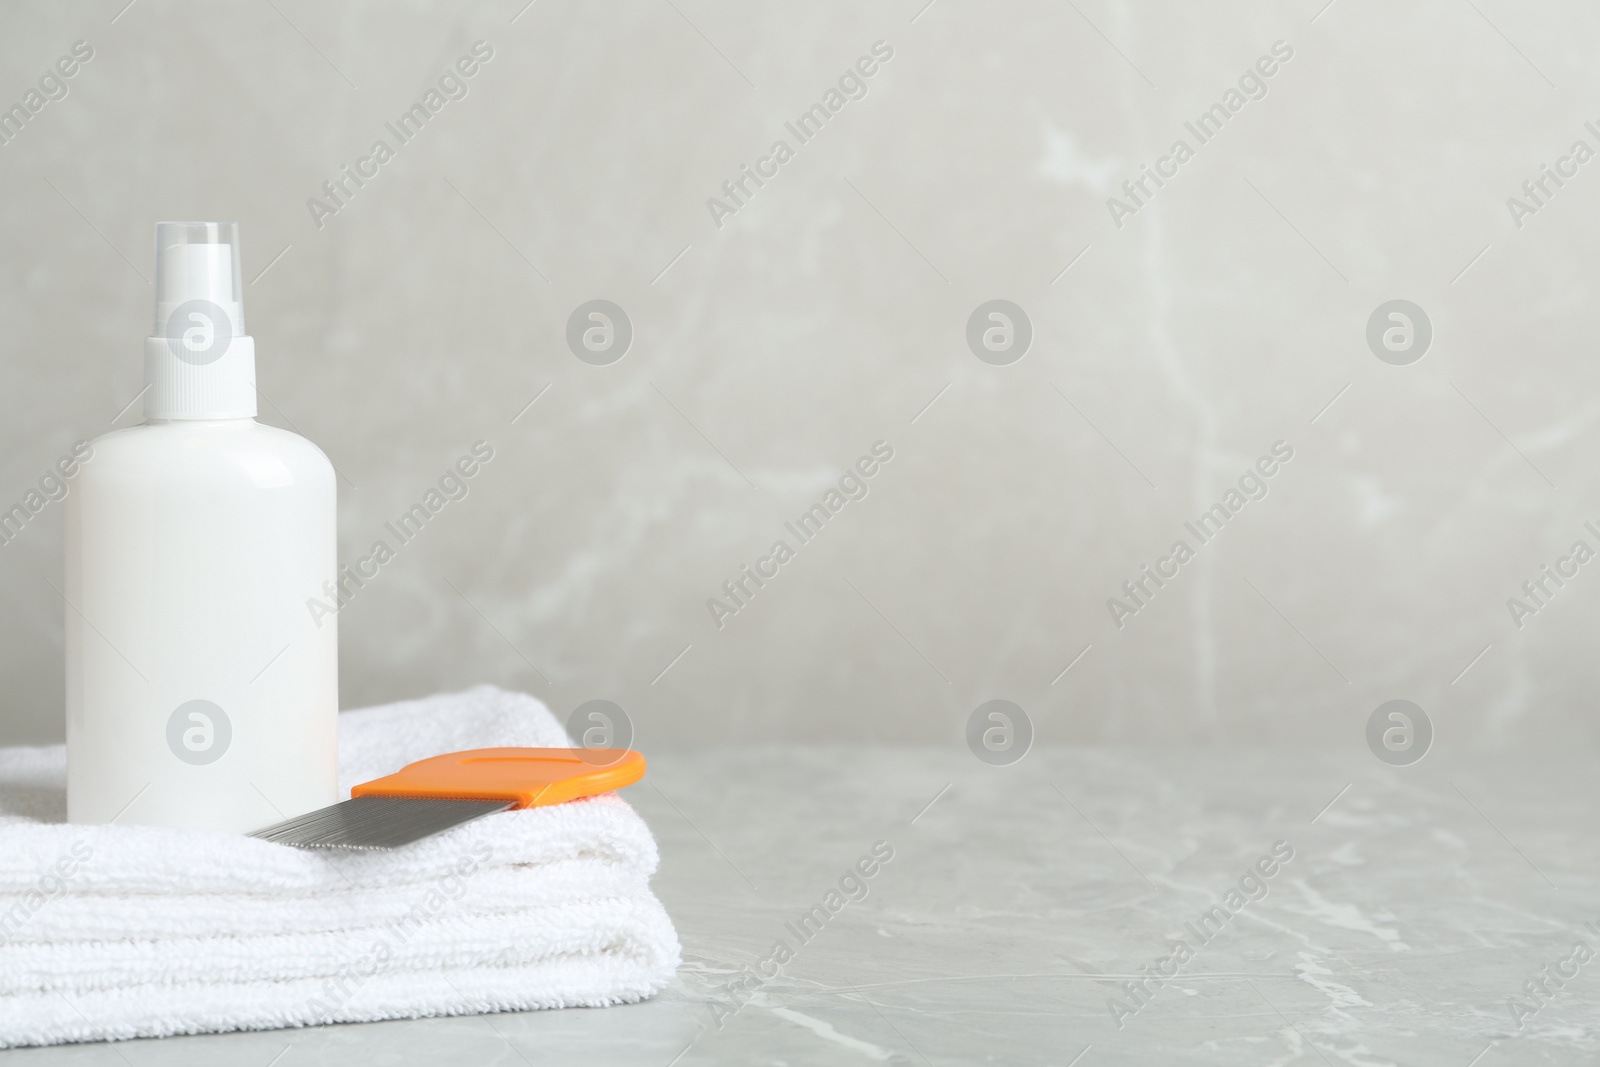 Photo of Cosmetic product, lice comb and towels on light grey table. Space for text